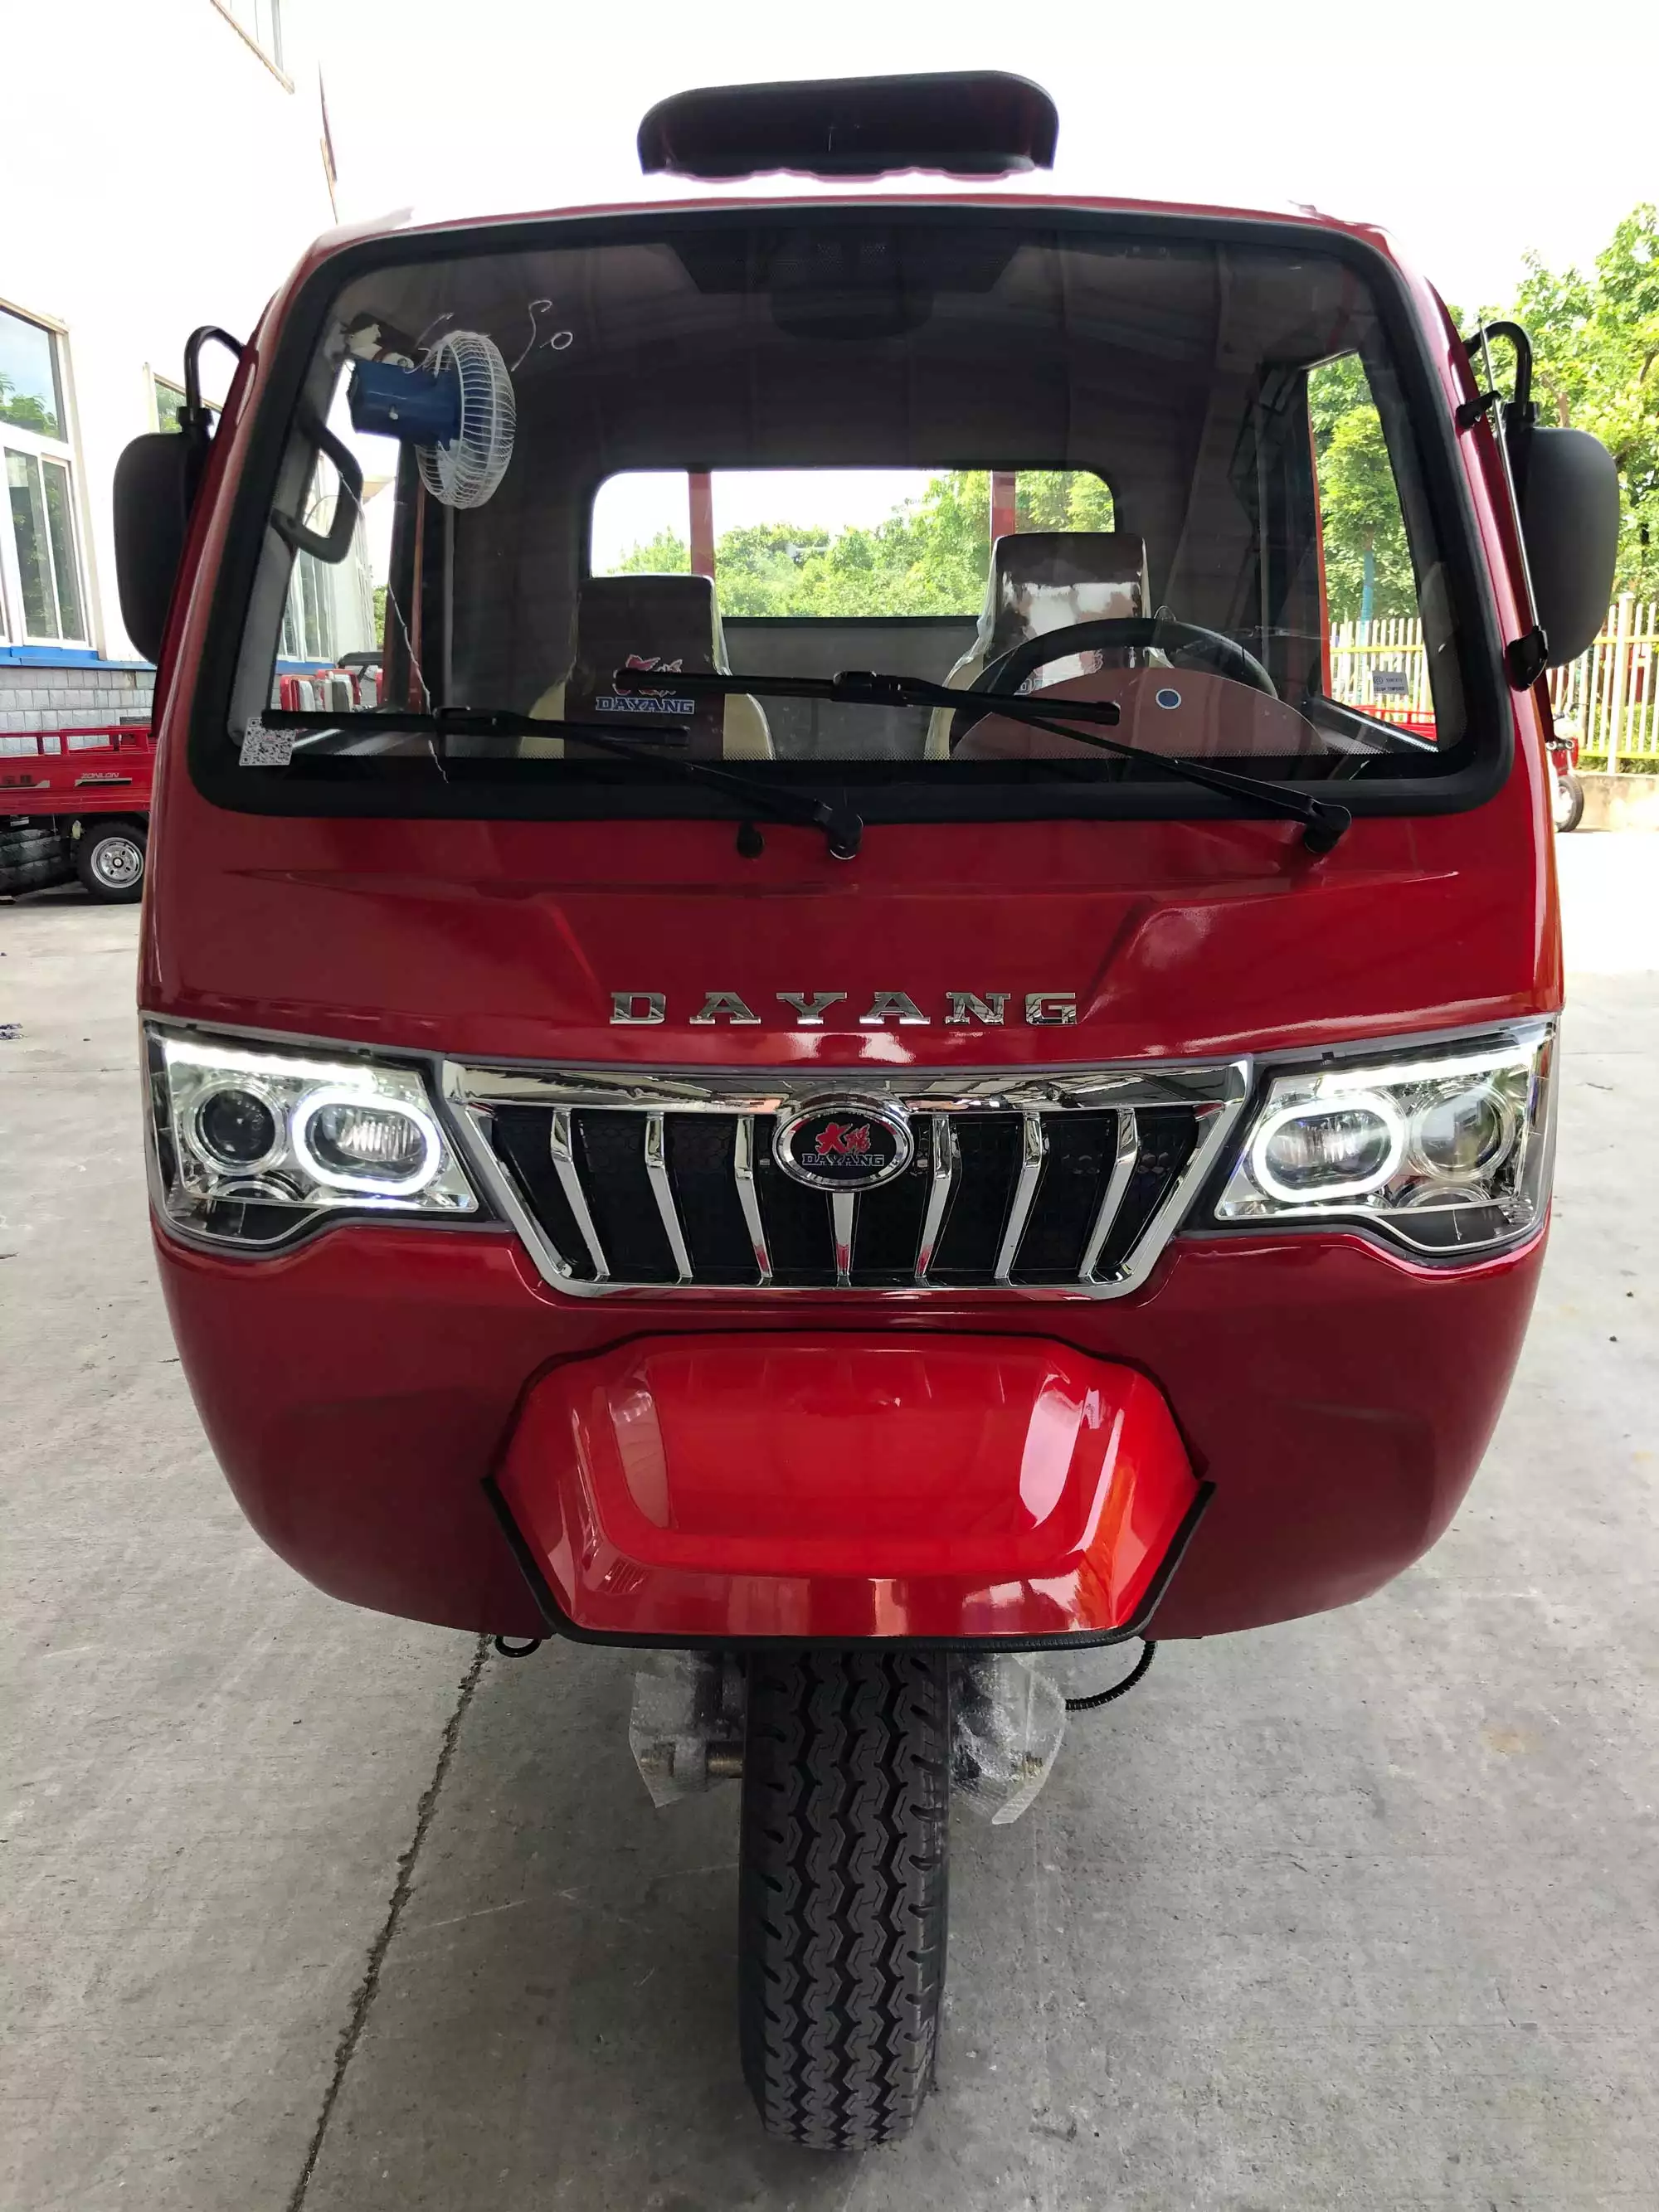 Dayang Luxury Series 800cc powerful Heavy Duty Cargo Tricycle T7 Closed Cab Large Cargo Box Car Steering Wheel Tricycle